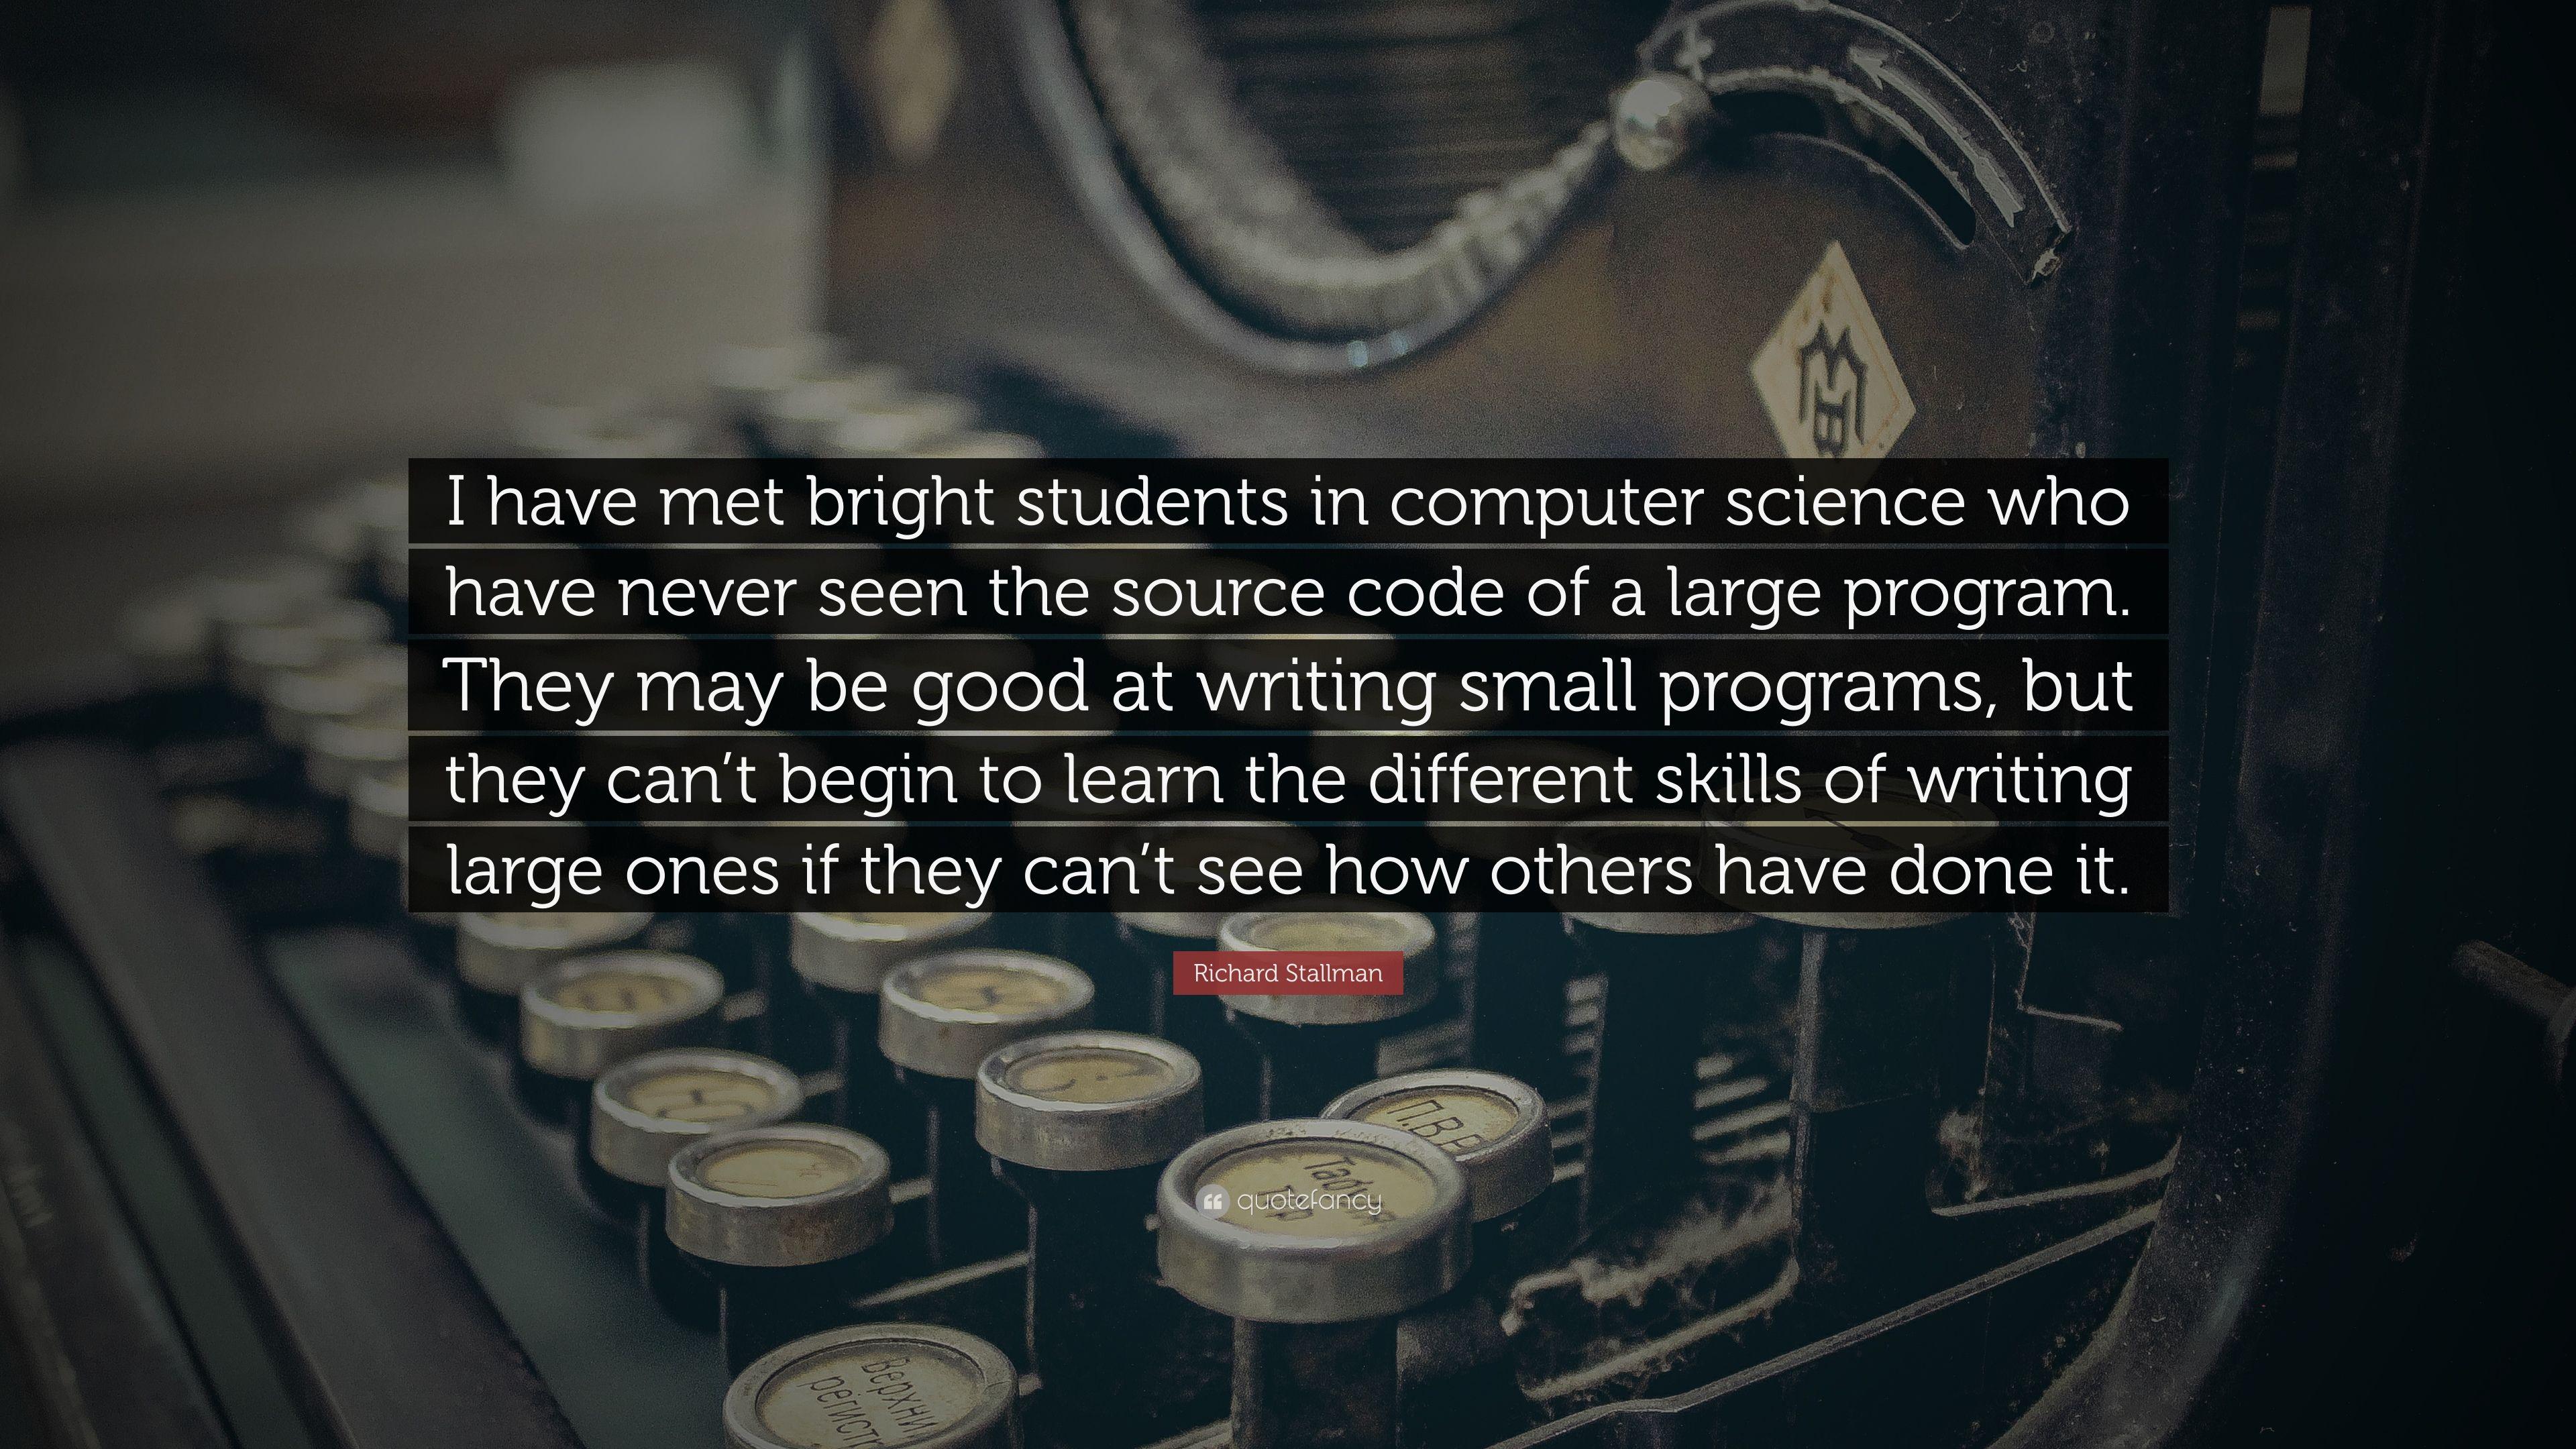 Richard Stallman Quote: “I have met bright students in computer